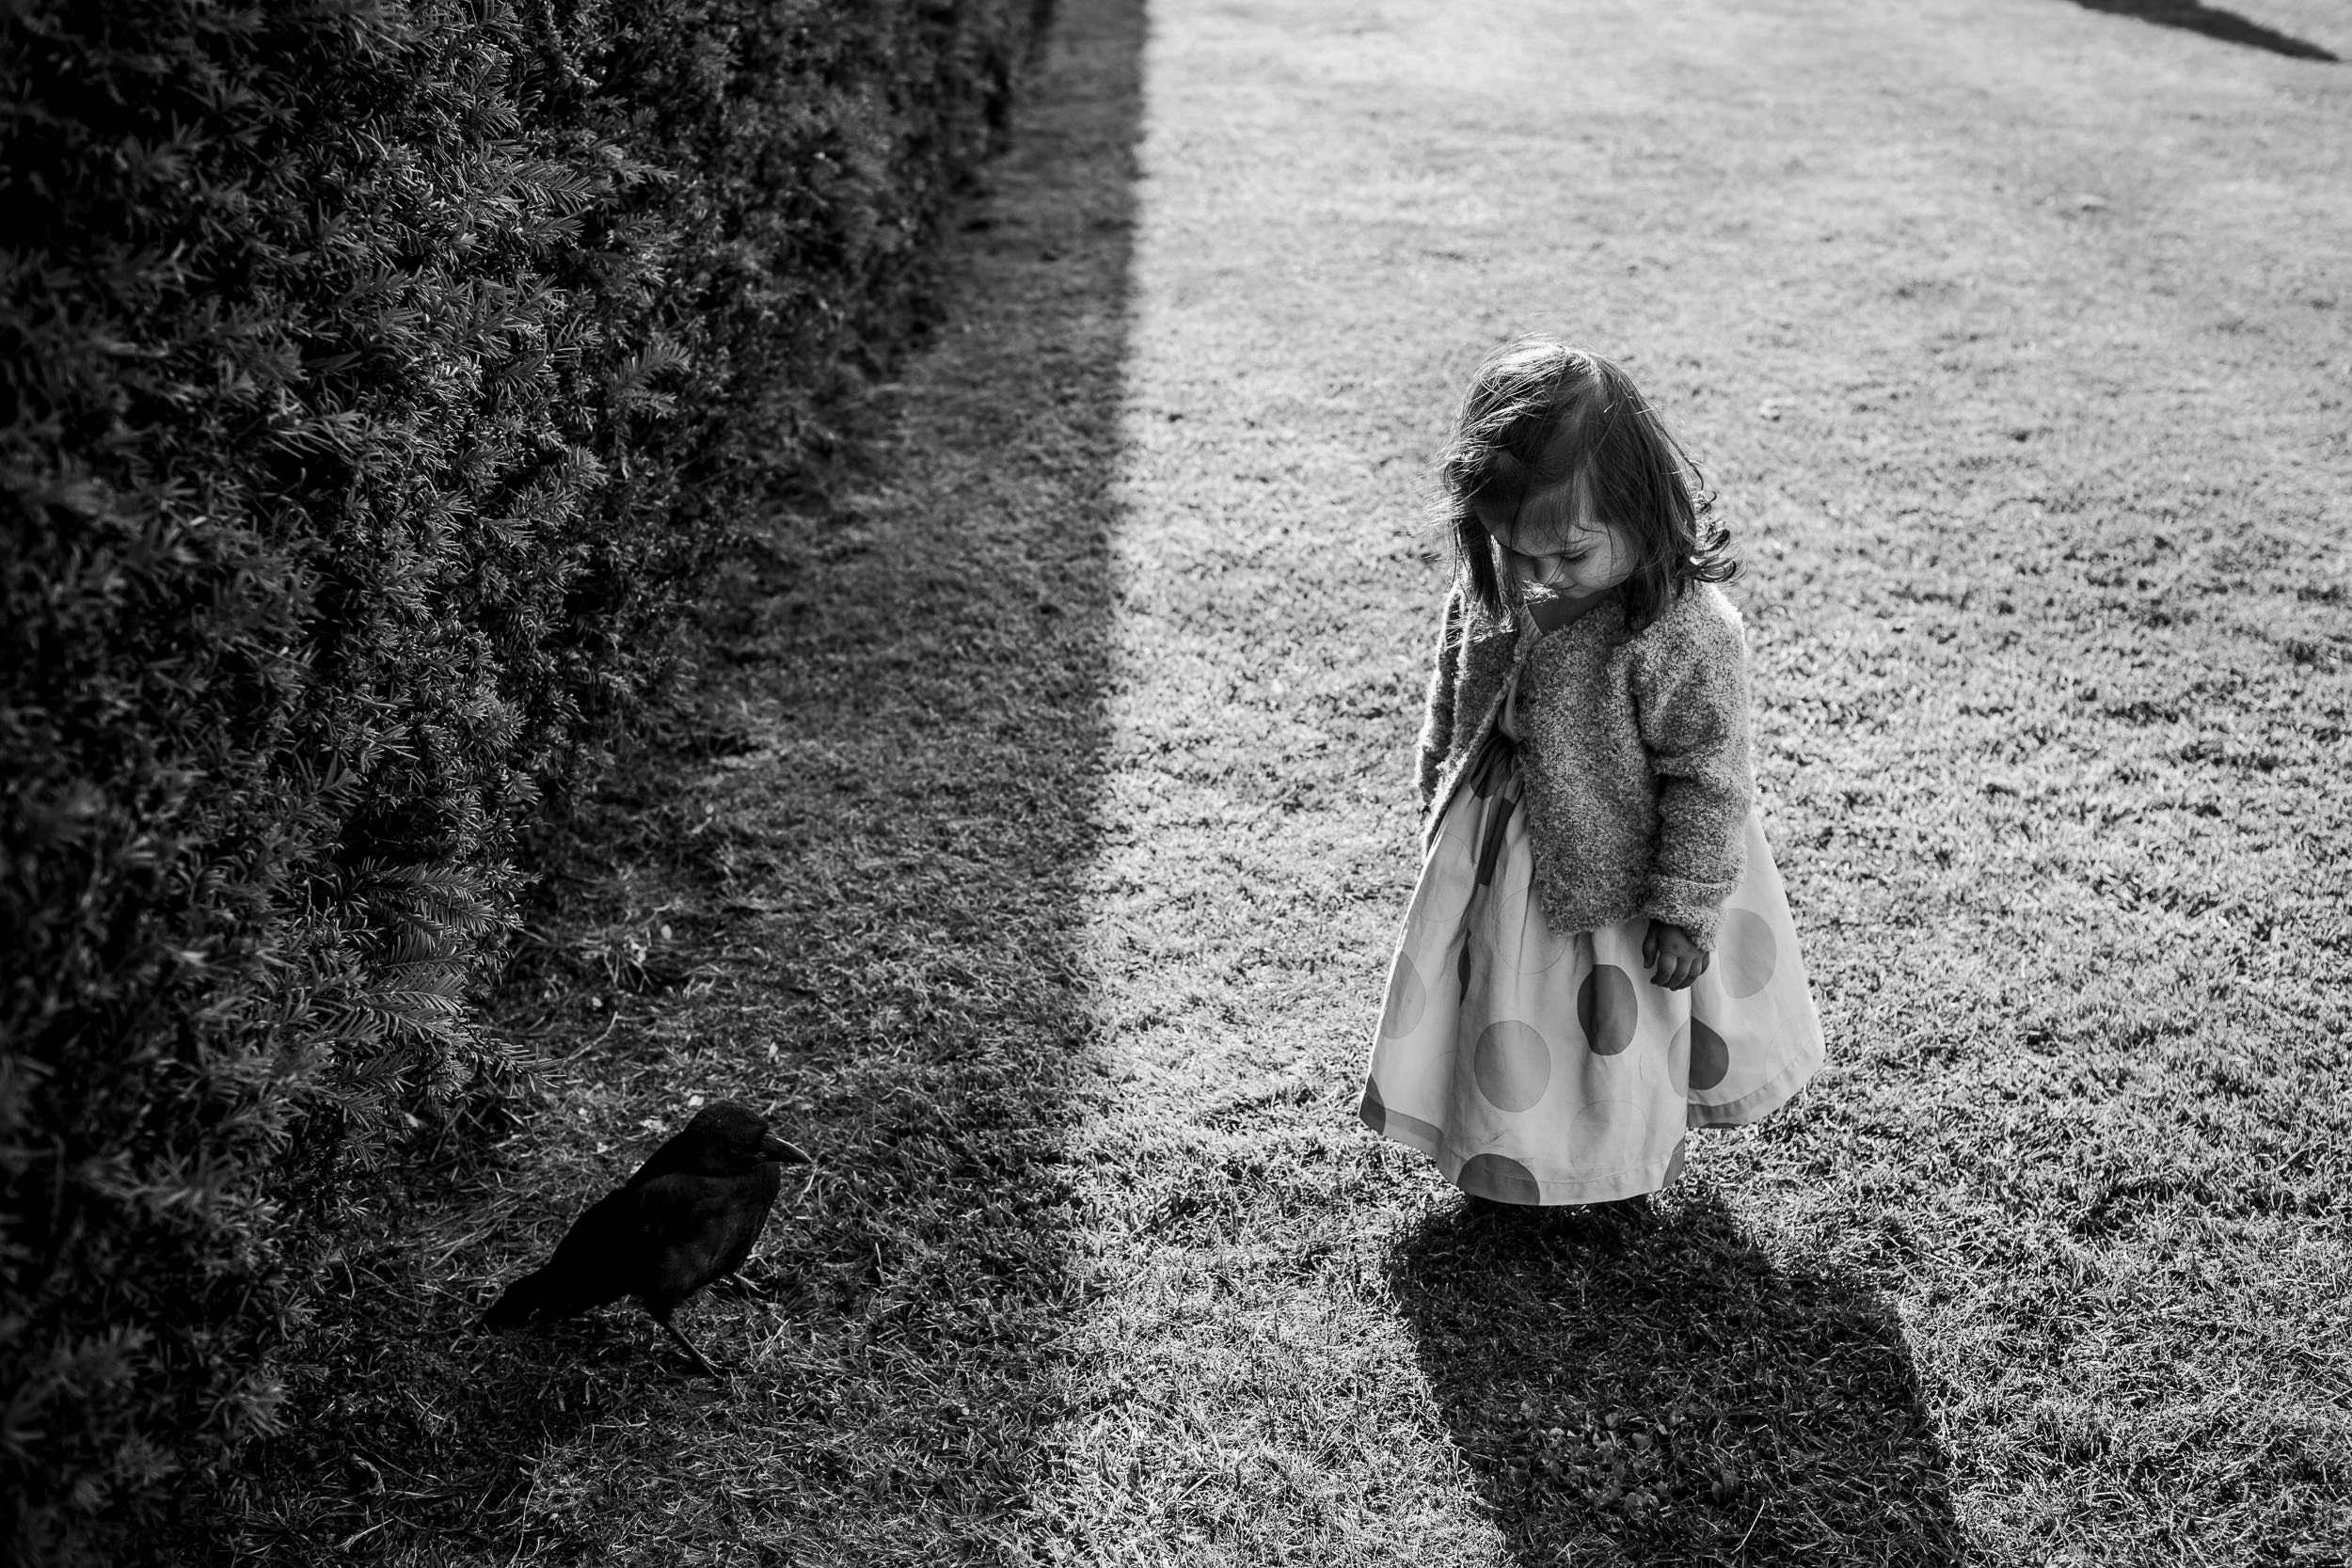 Flower girl at a wedding - flower girl and her crow - YSP wedding - 